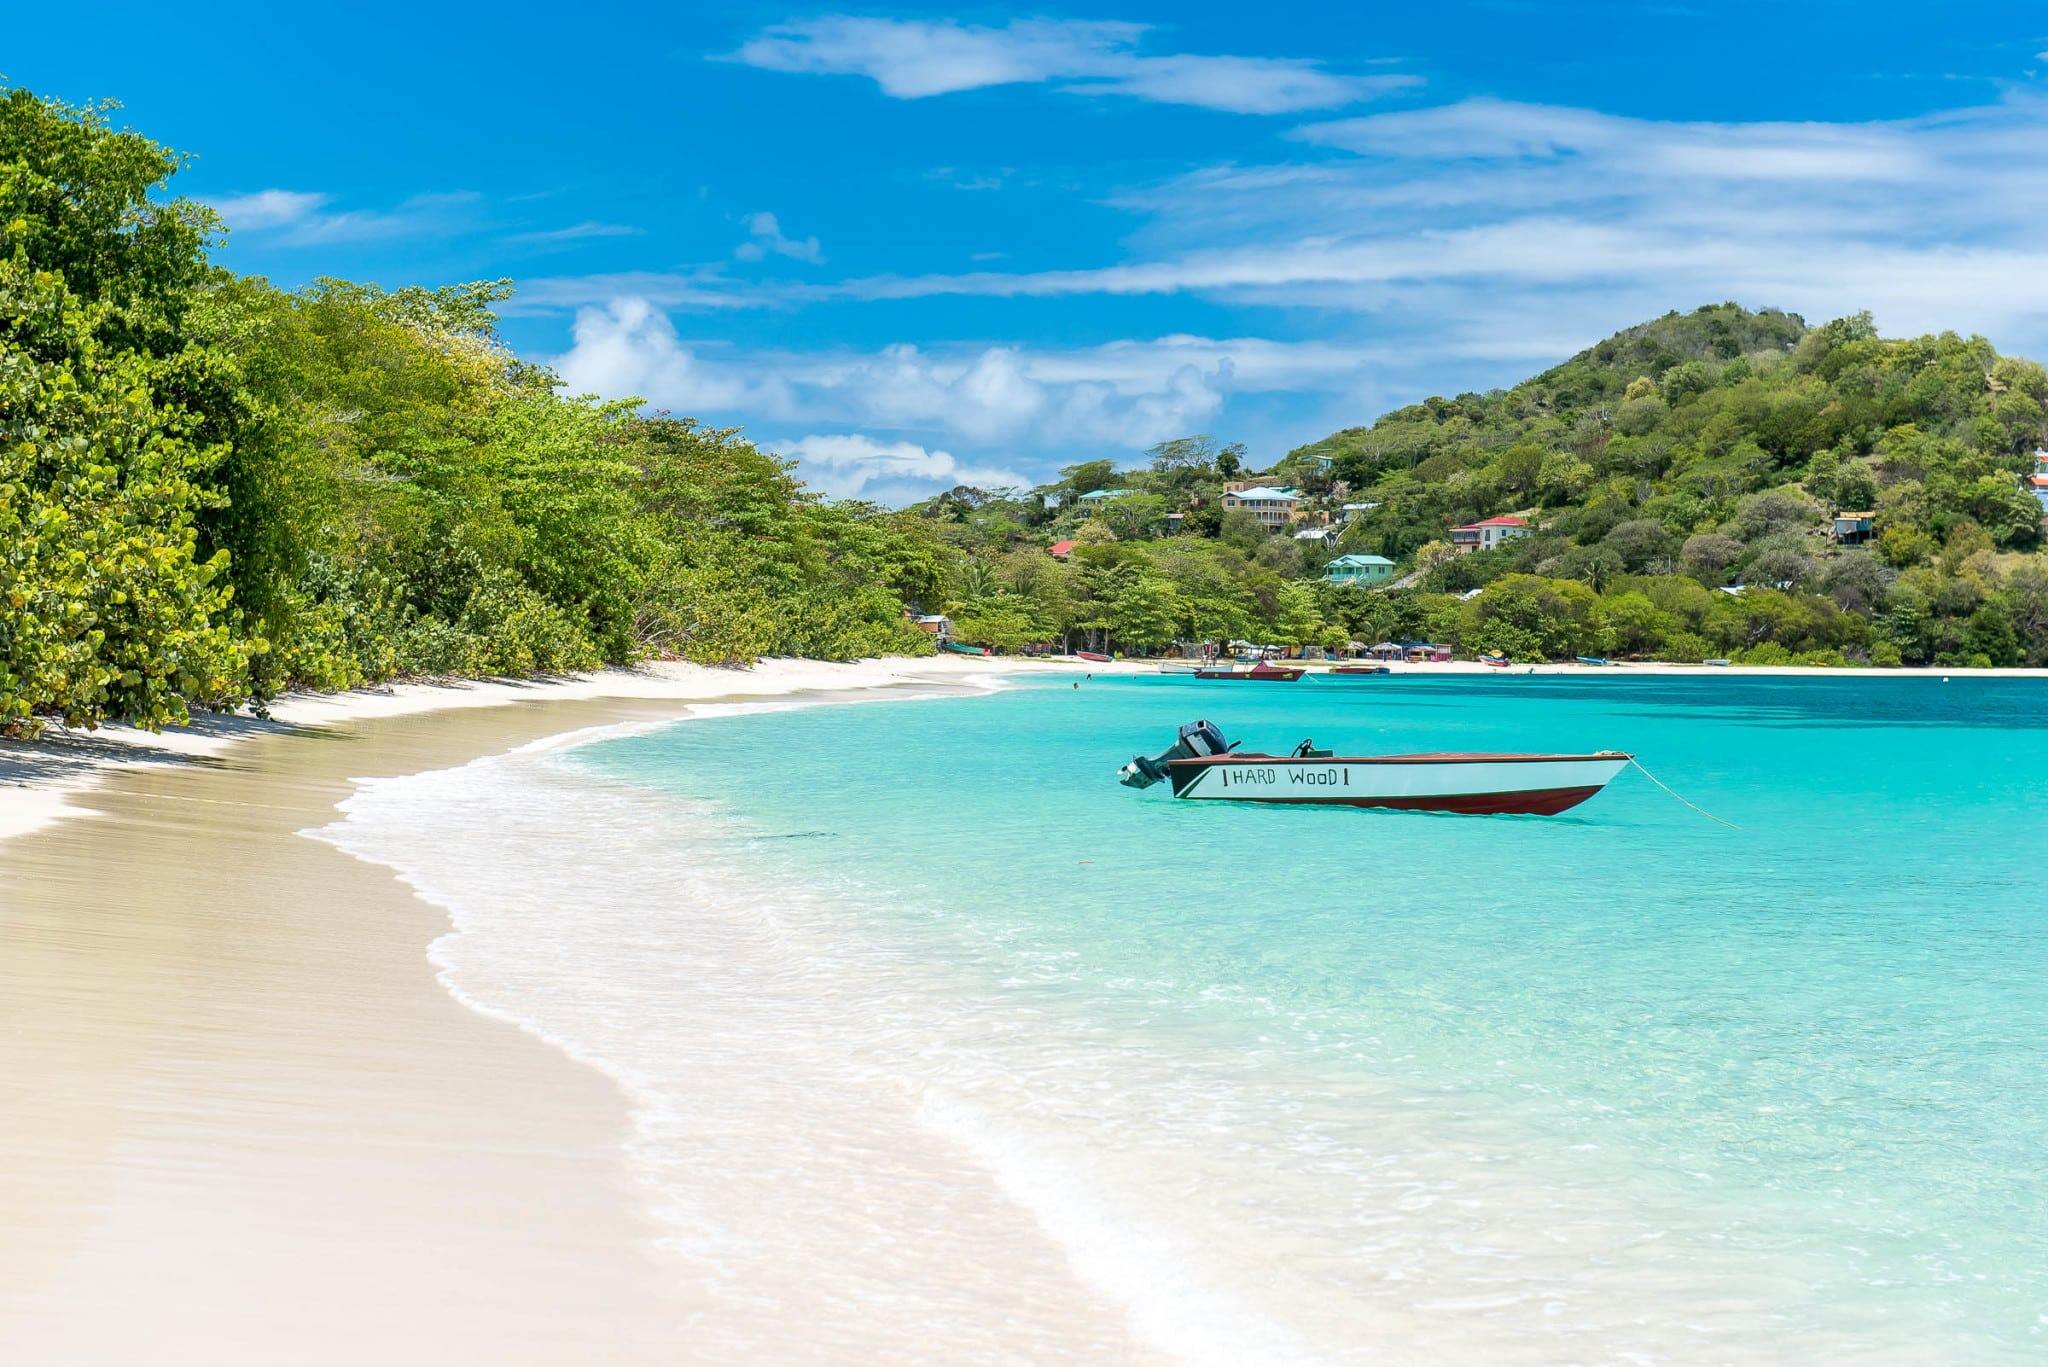 Top Best Popular Beaches to Visit in Grenada on Vacation